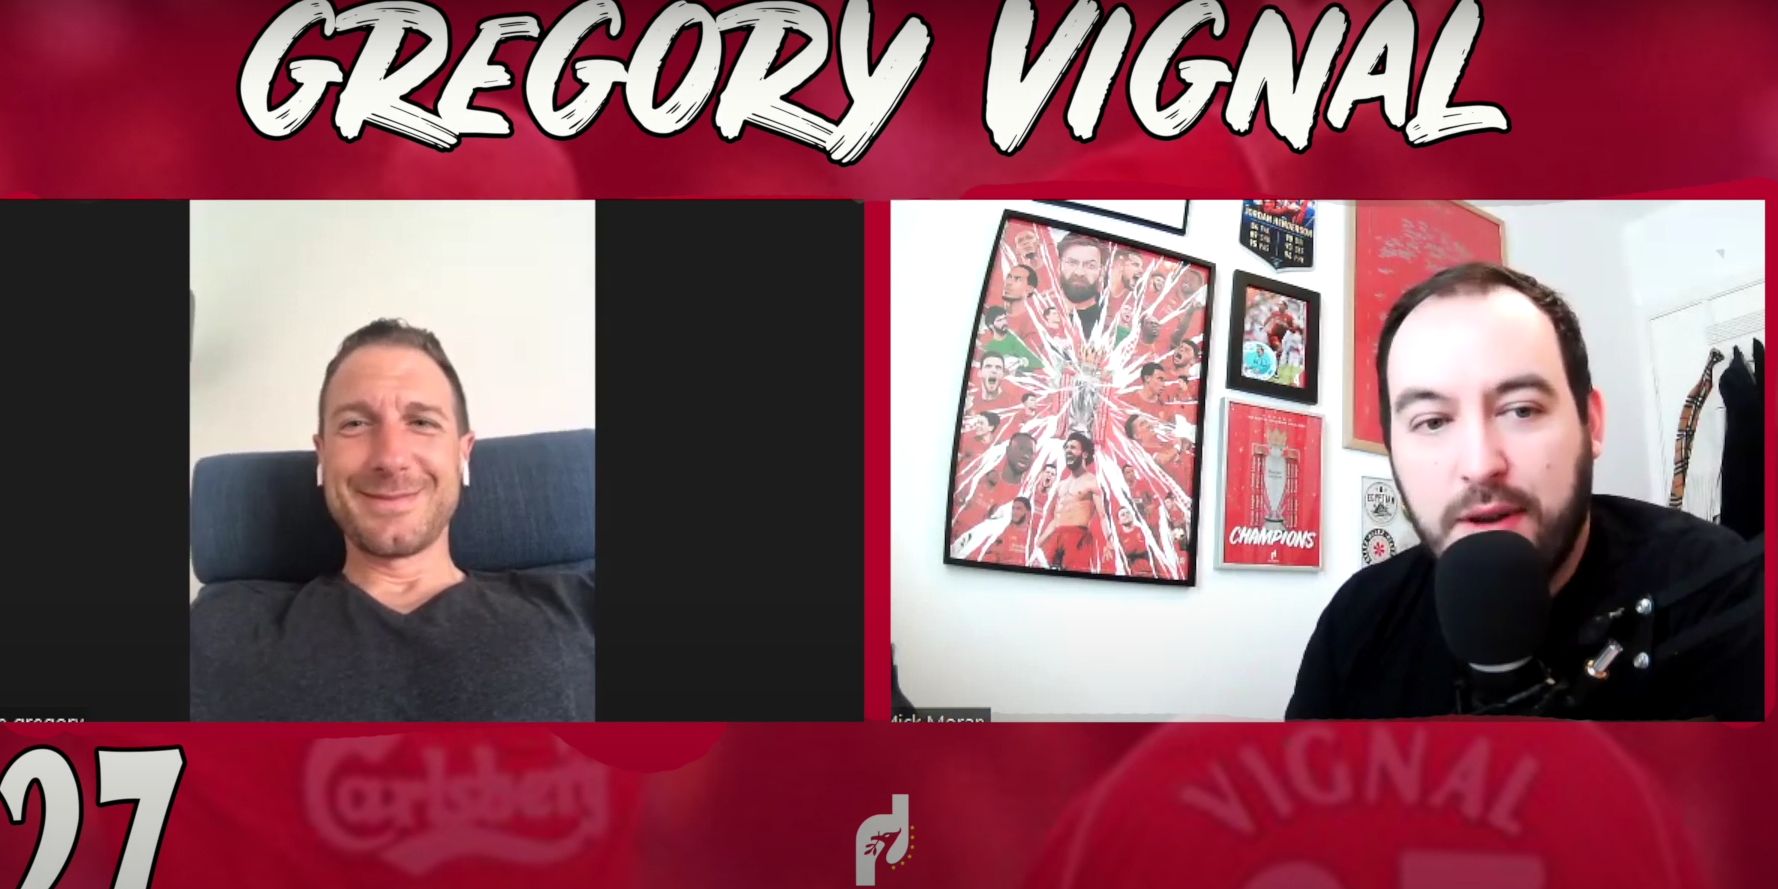 (Video) “What a man!” – Gregory Vignal gives his thoughts on Jurgen Klopp and the job he’s done at Liverpool since 2015